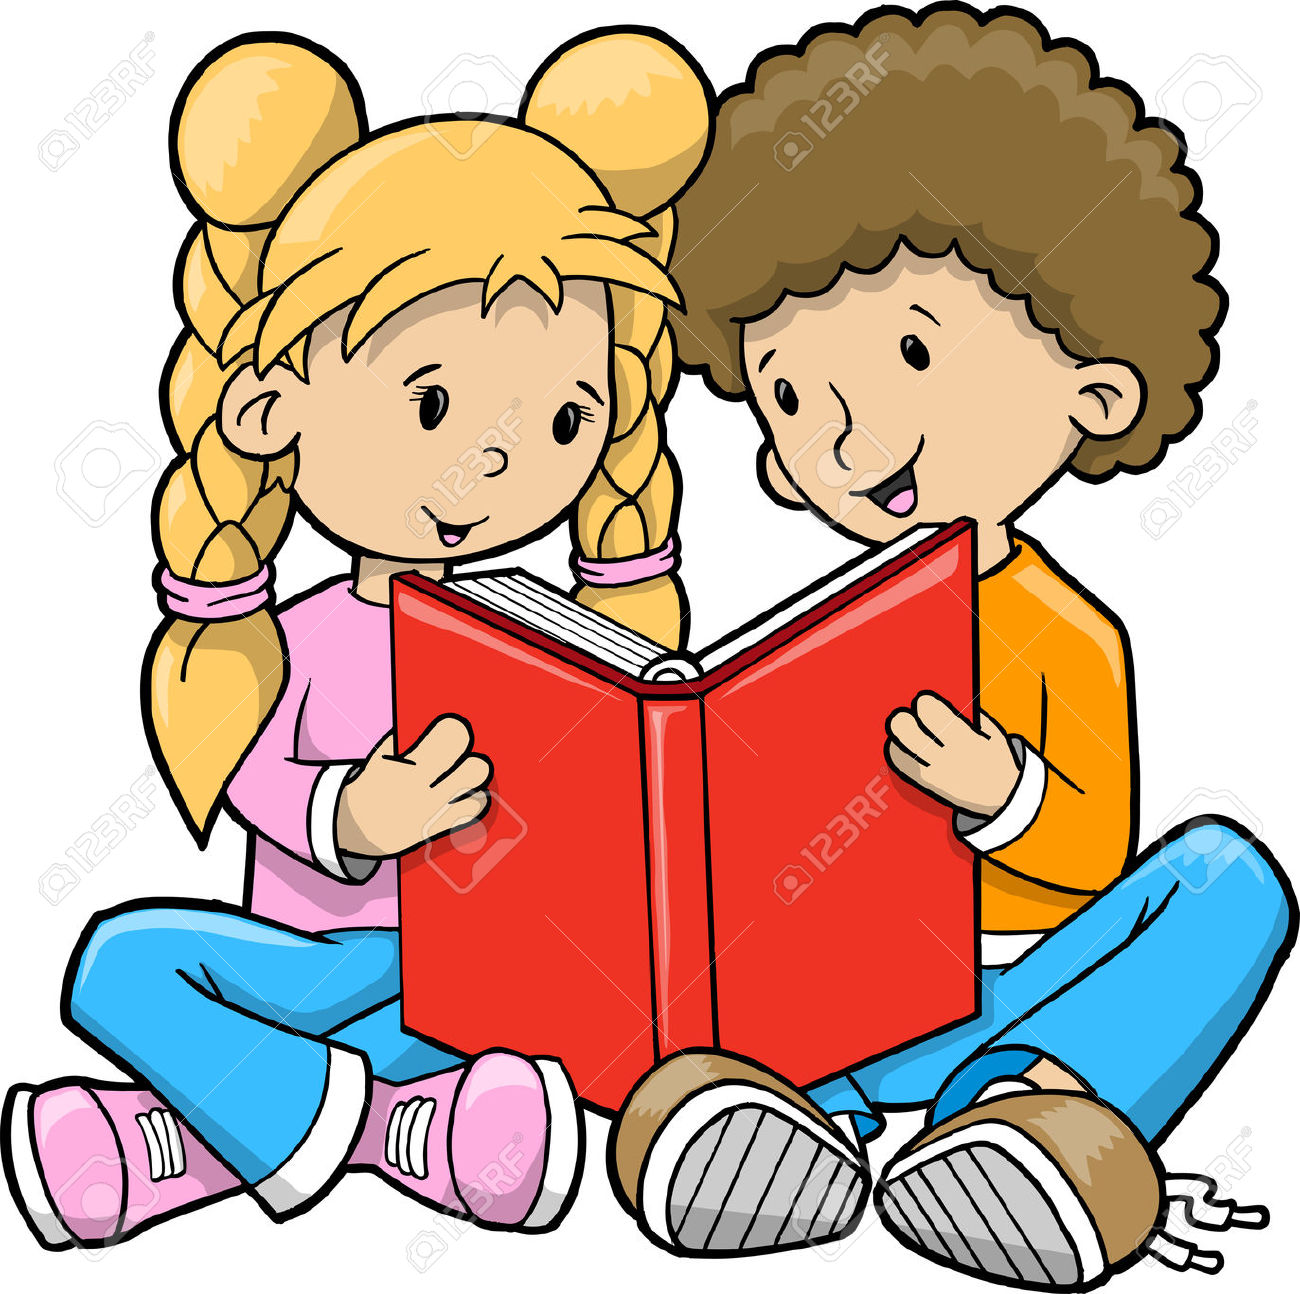 free animated clipart of books - photo #46